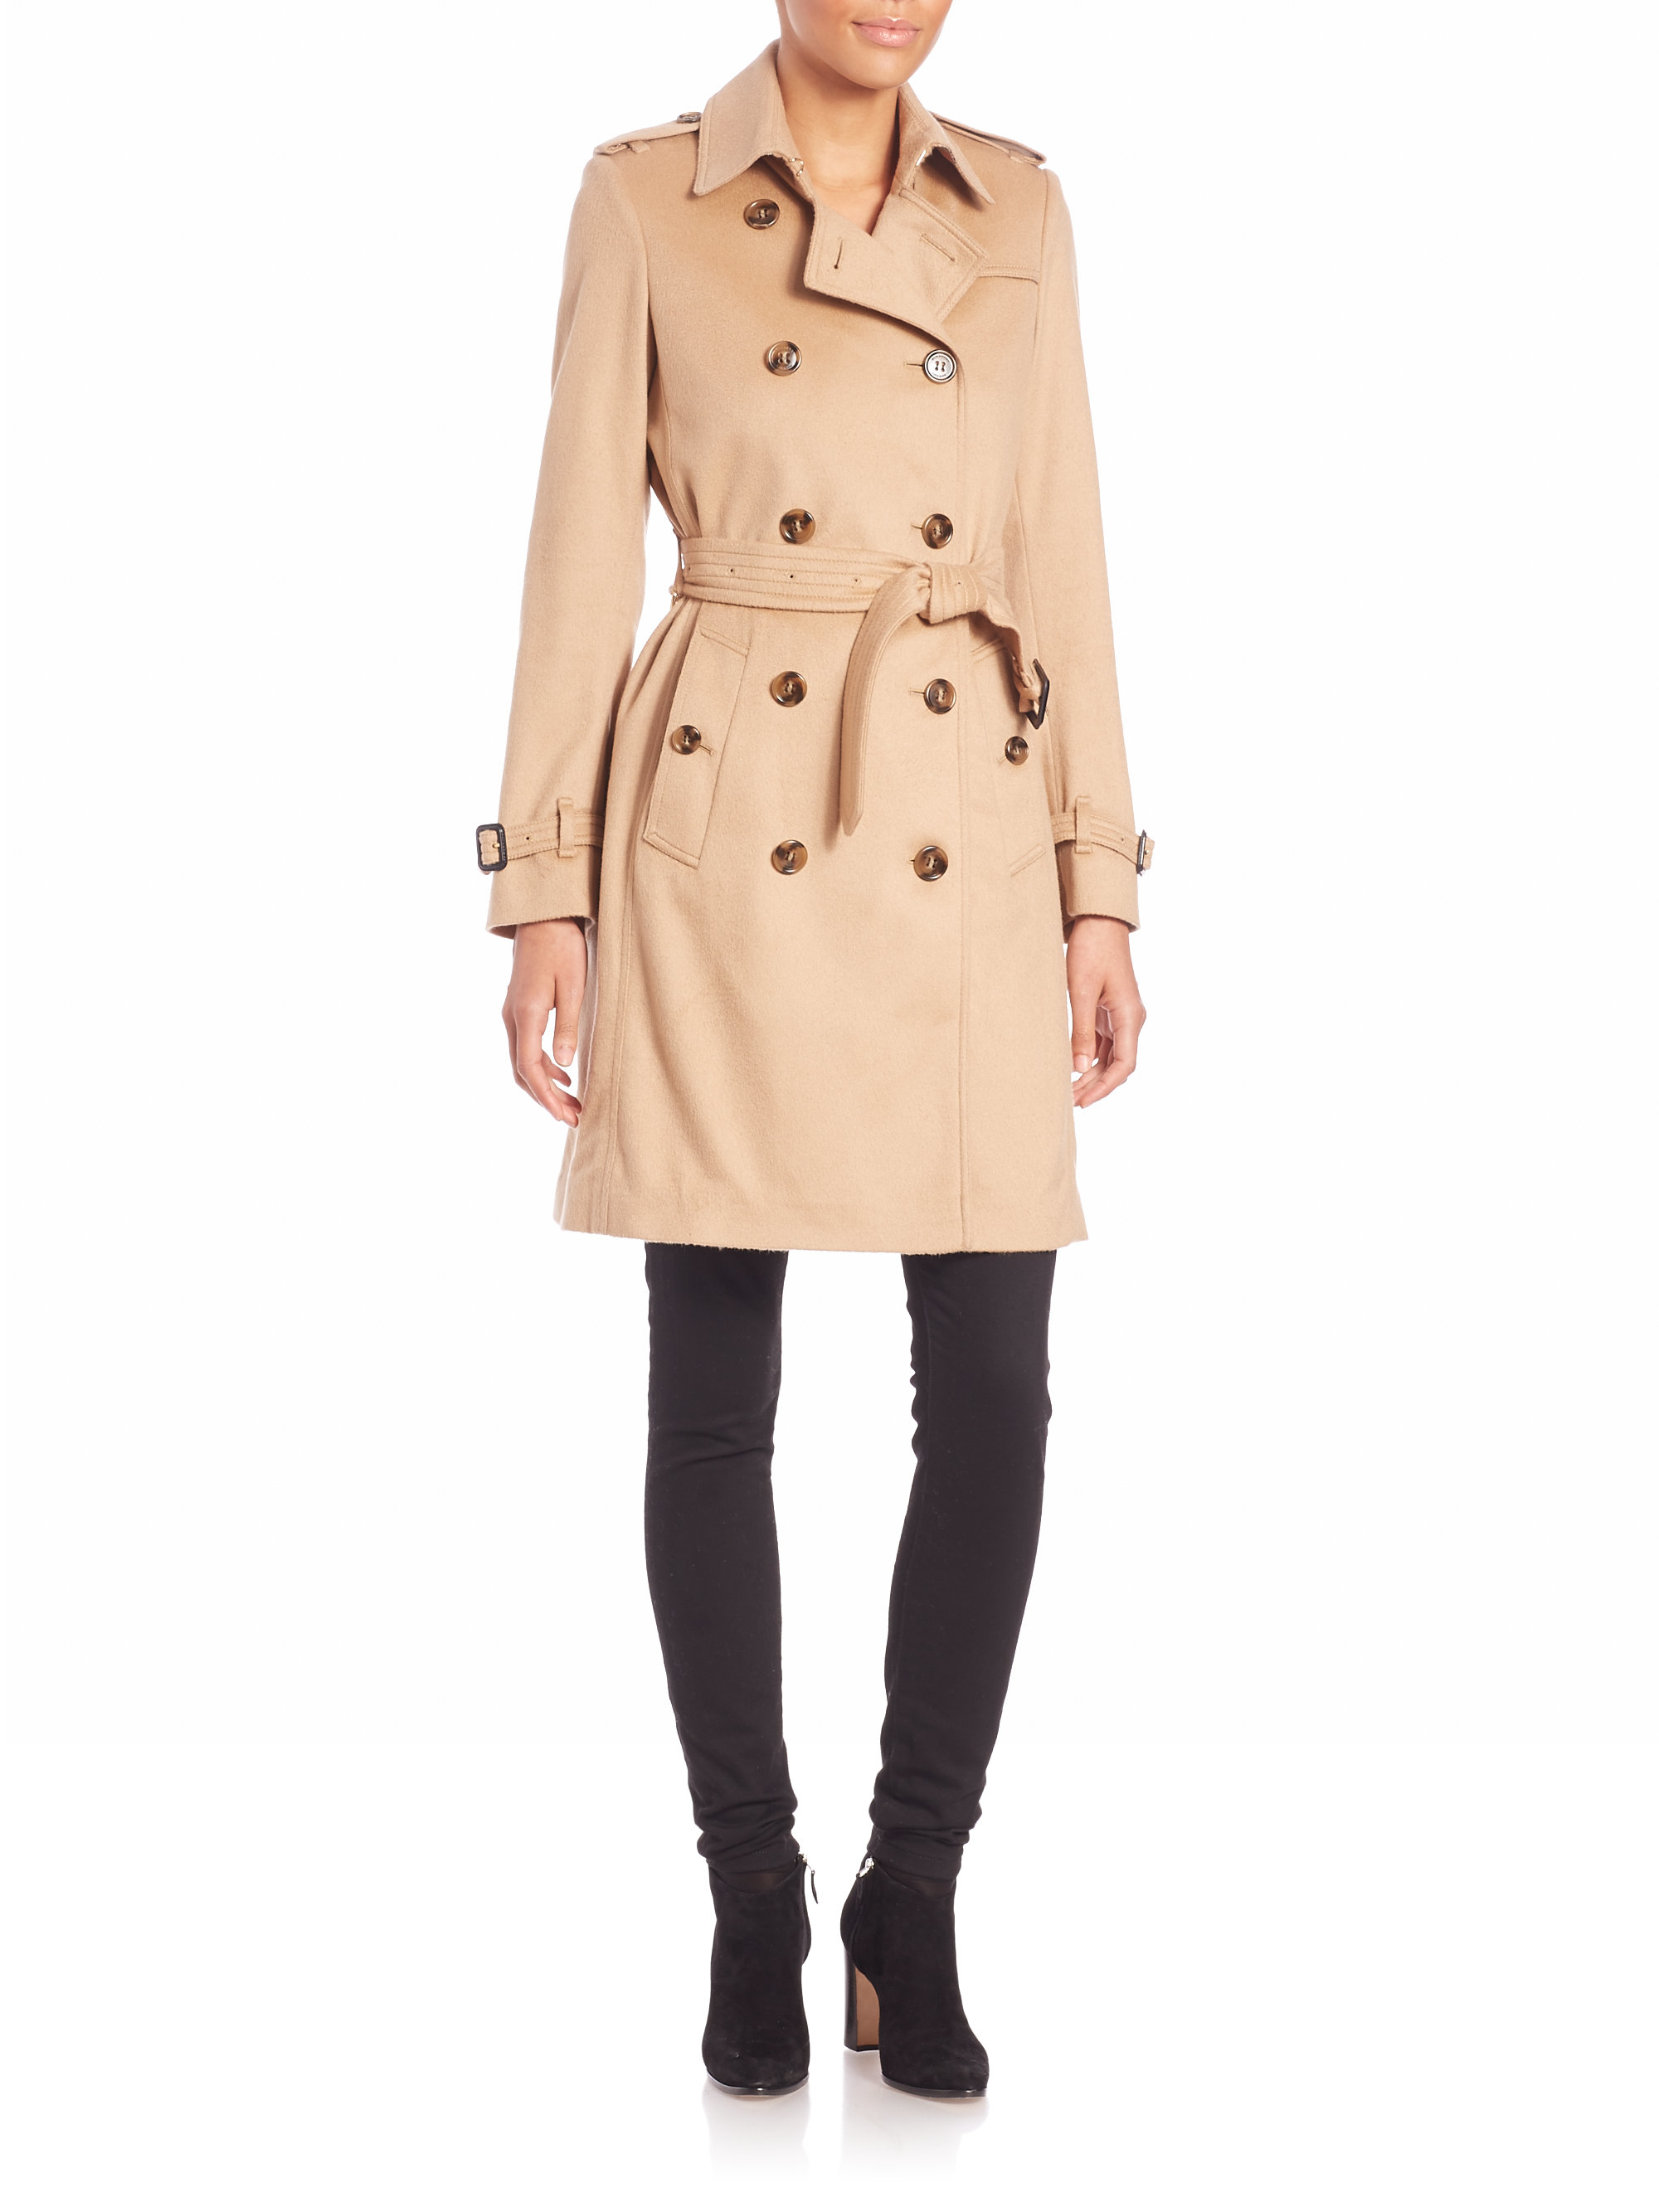 Burberry Kensington Camel Cashmere Trench Coat in Natural - Lyst